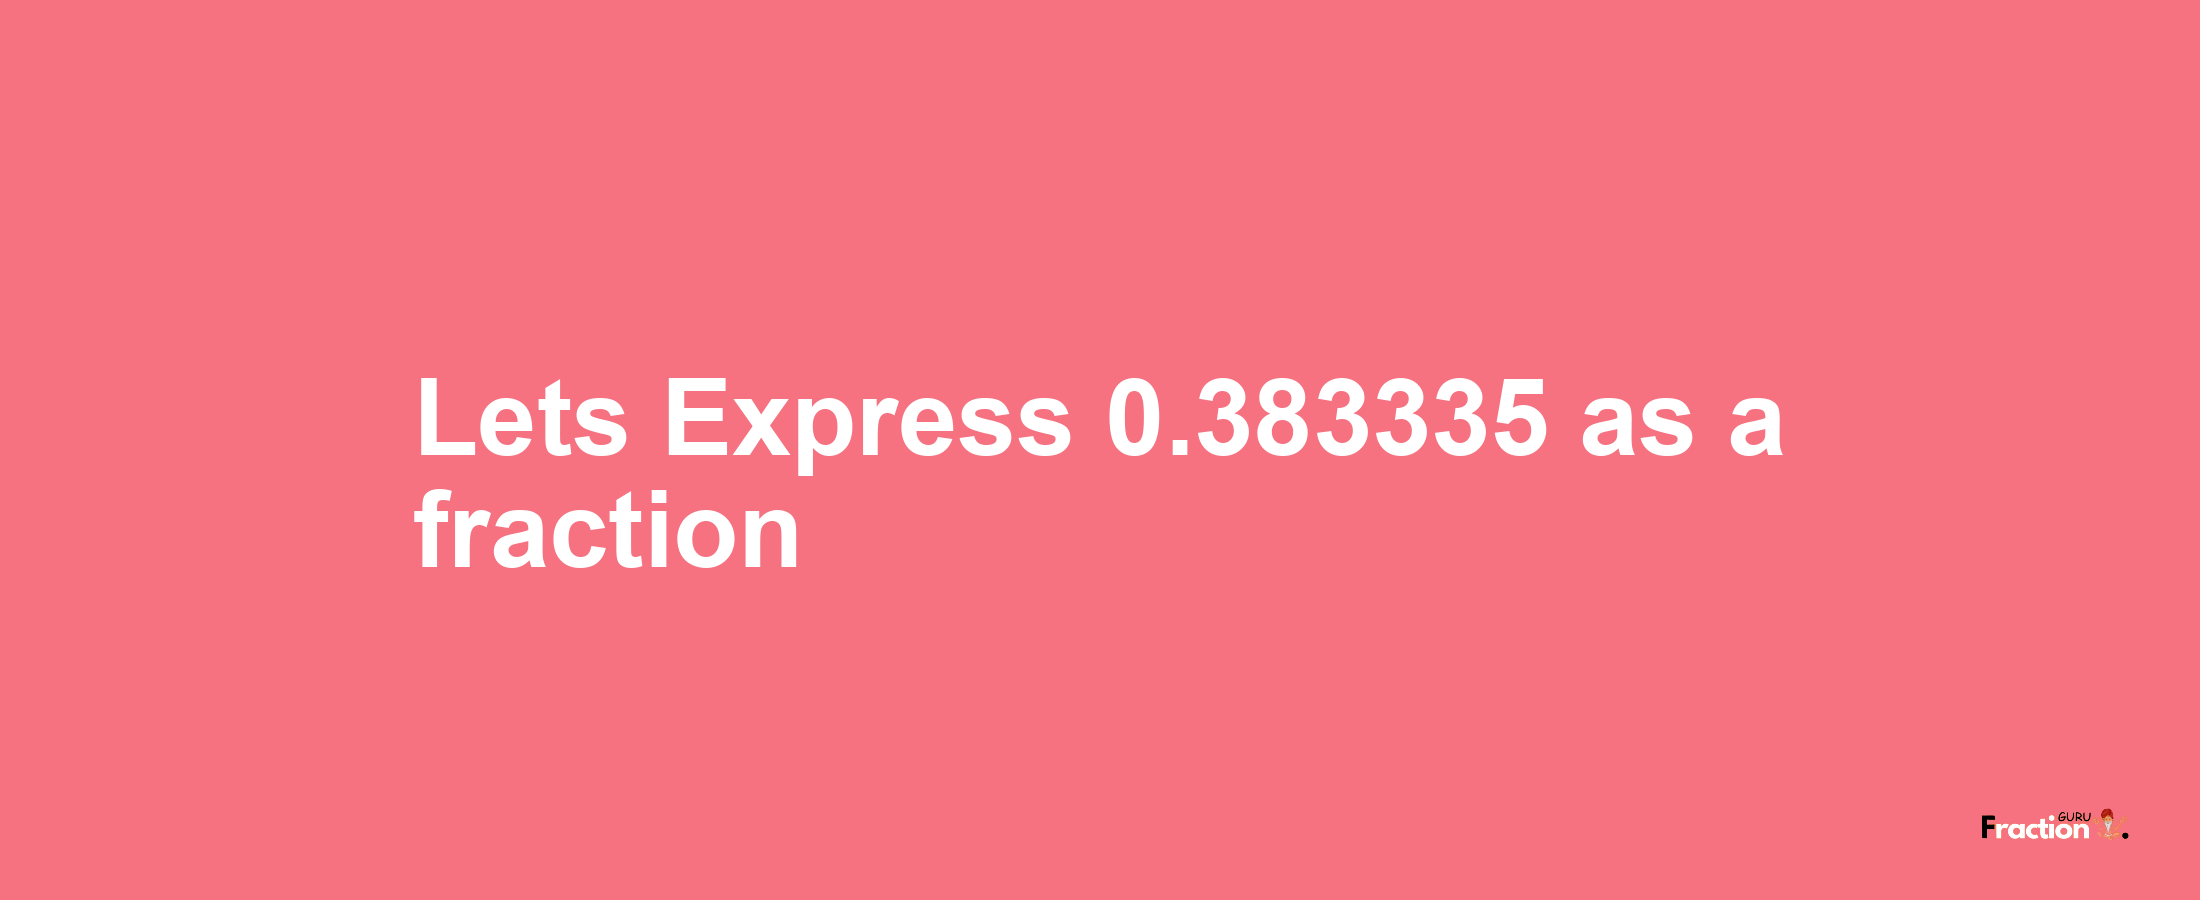 Lets Express 0.383335 as afraction